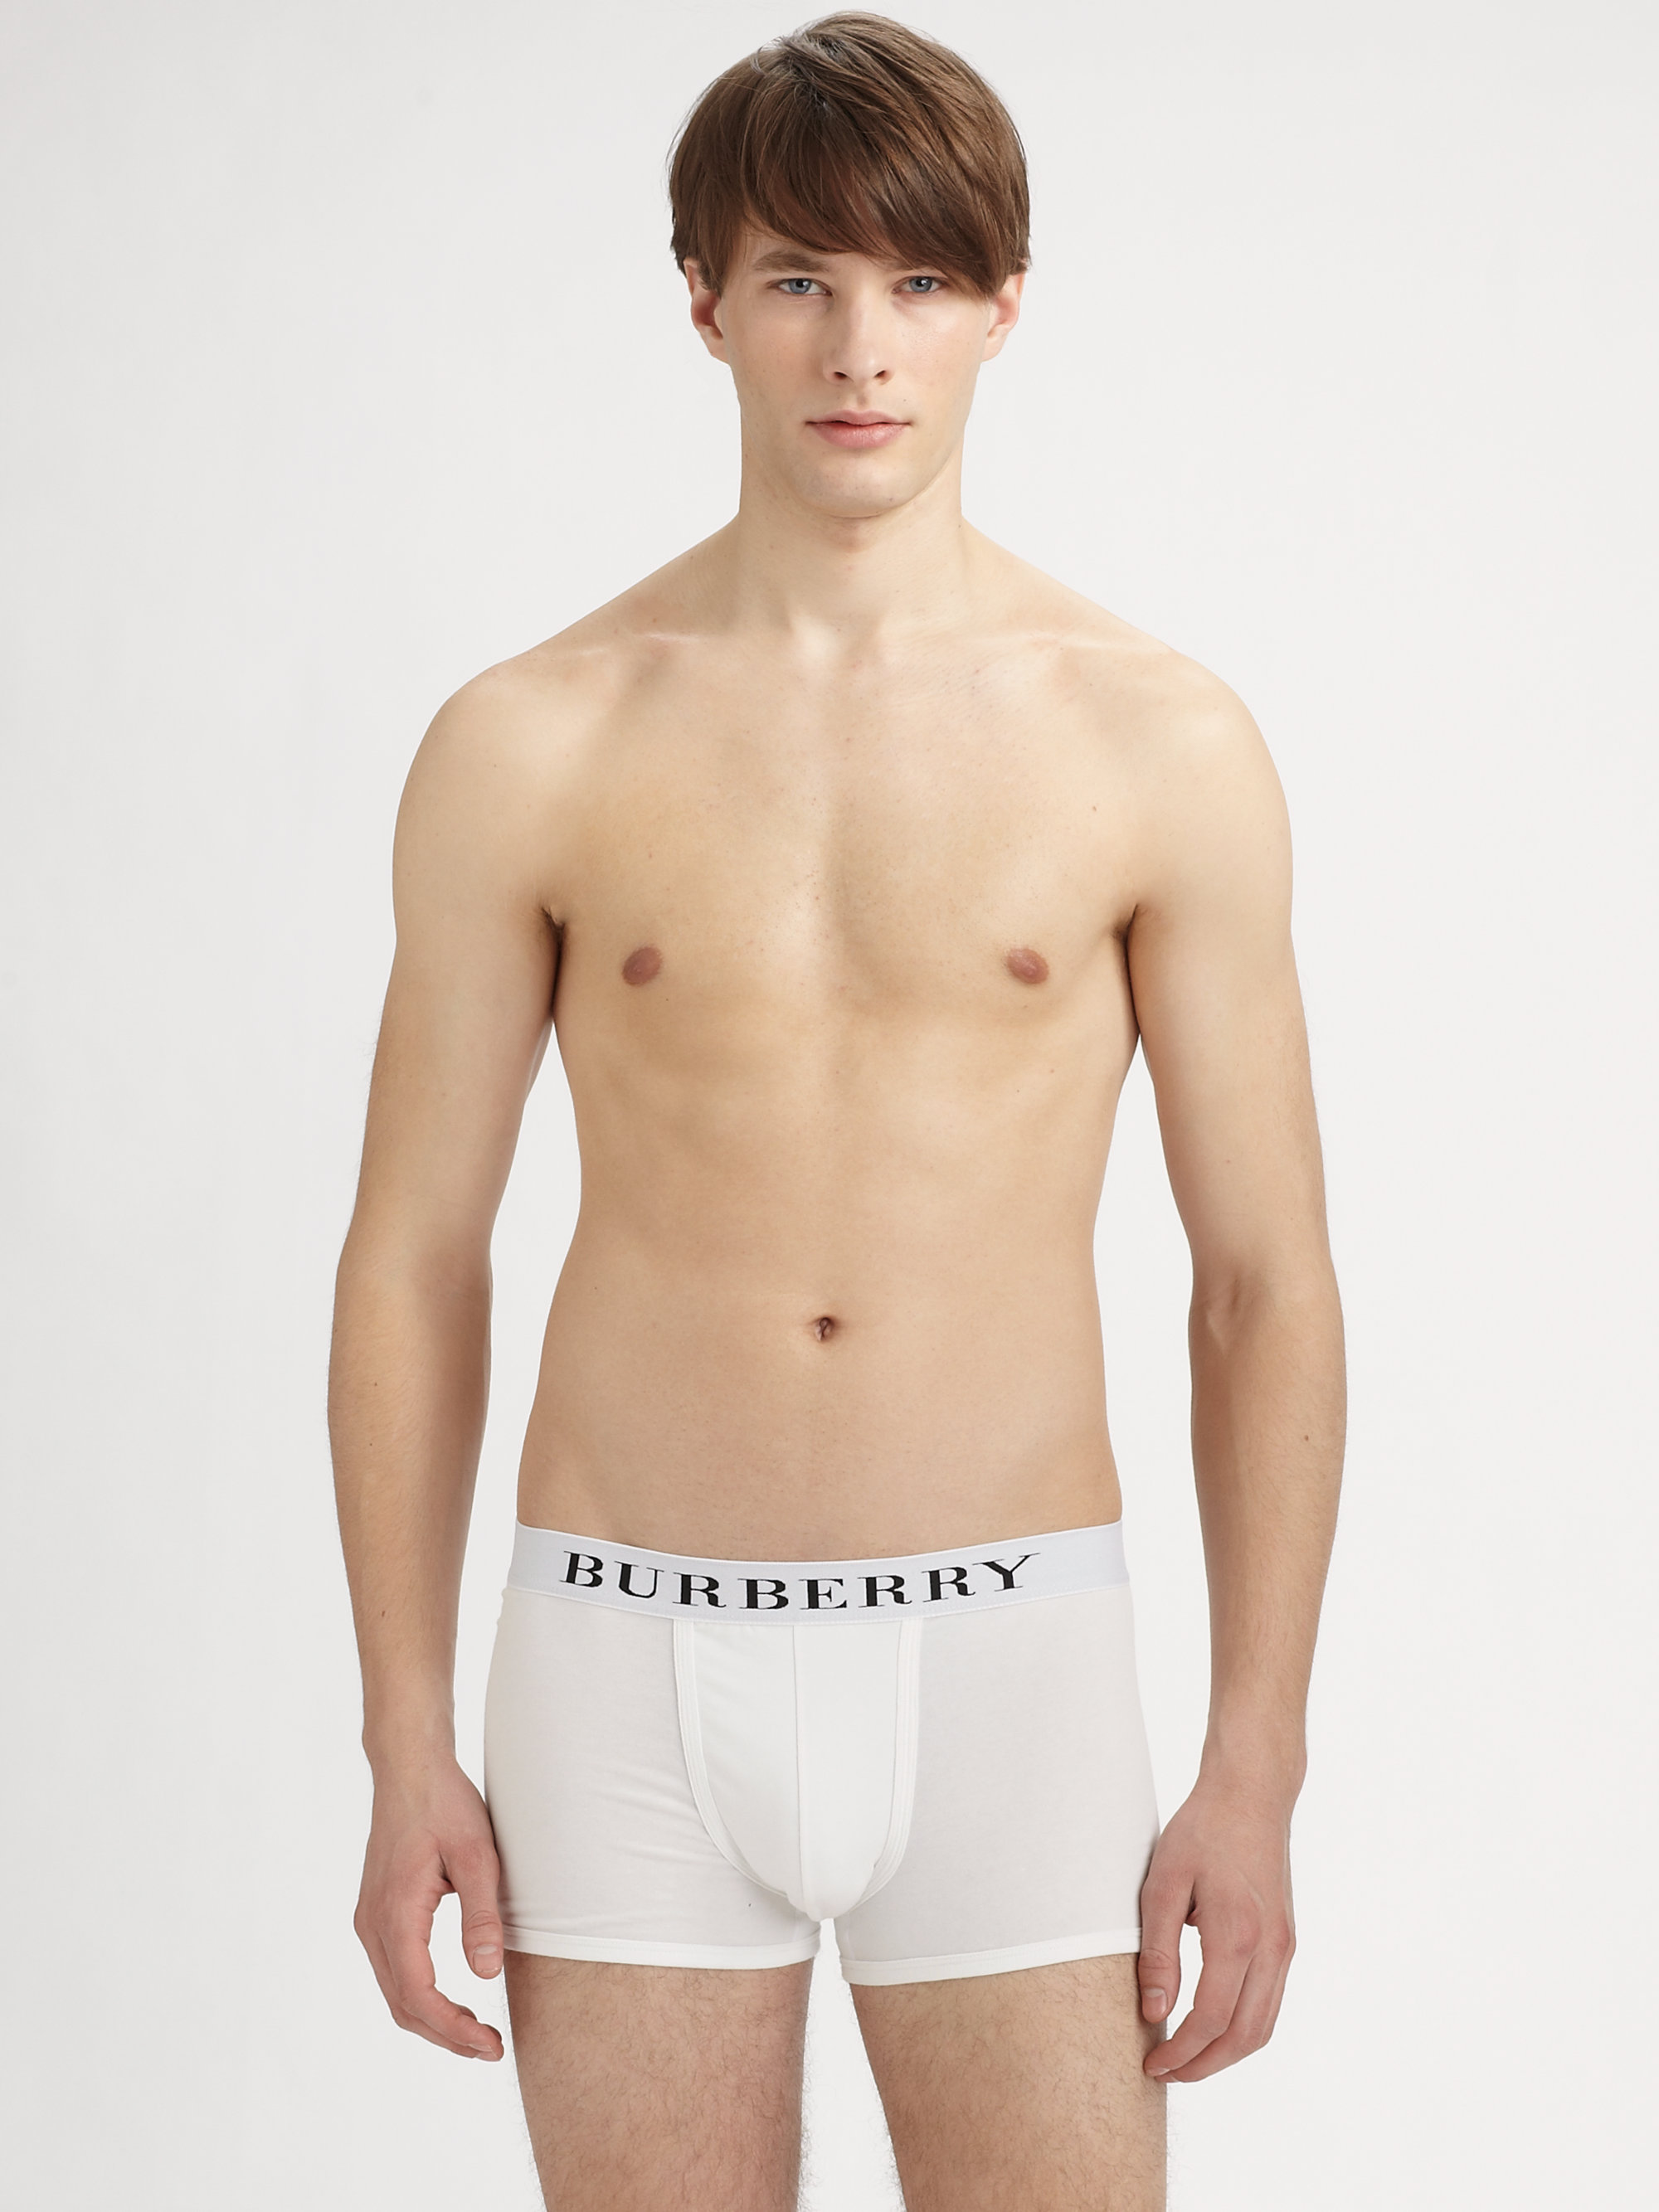 burberry boxer briefs Online Shopping for Women, Men, Kids Fashion &  Lifestyle|Free Delivery & Returns! -